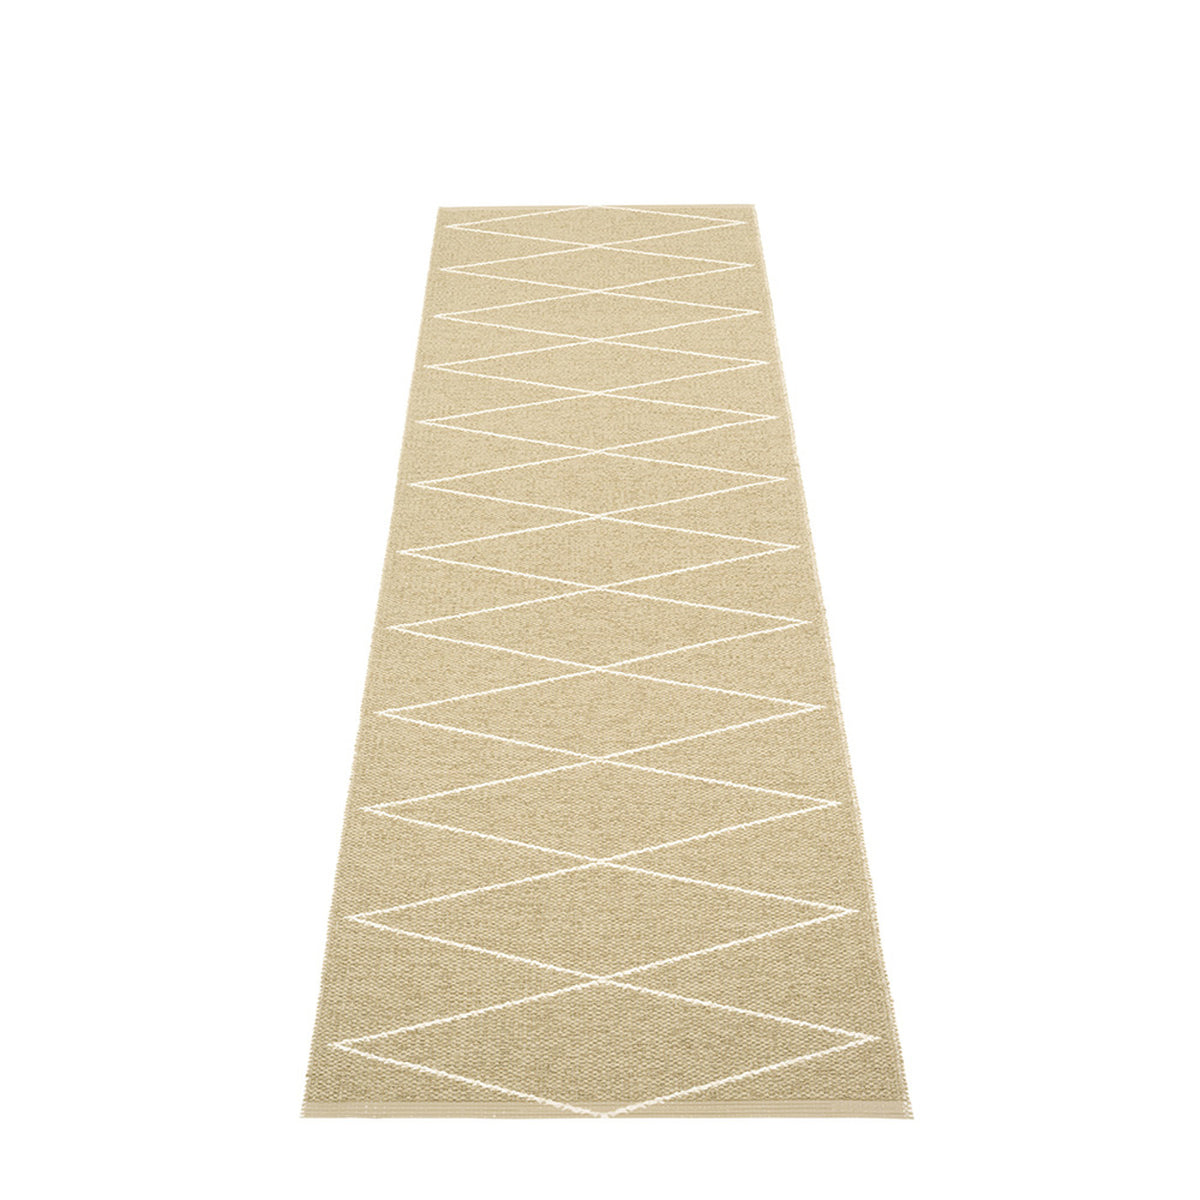 Pappelina Rug MAX Sand 2.25 x 5.25 ft  image 2